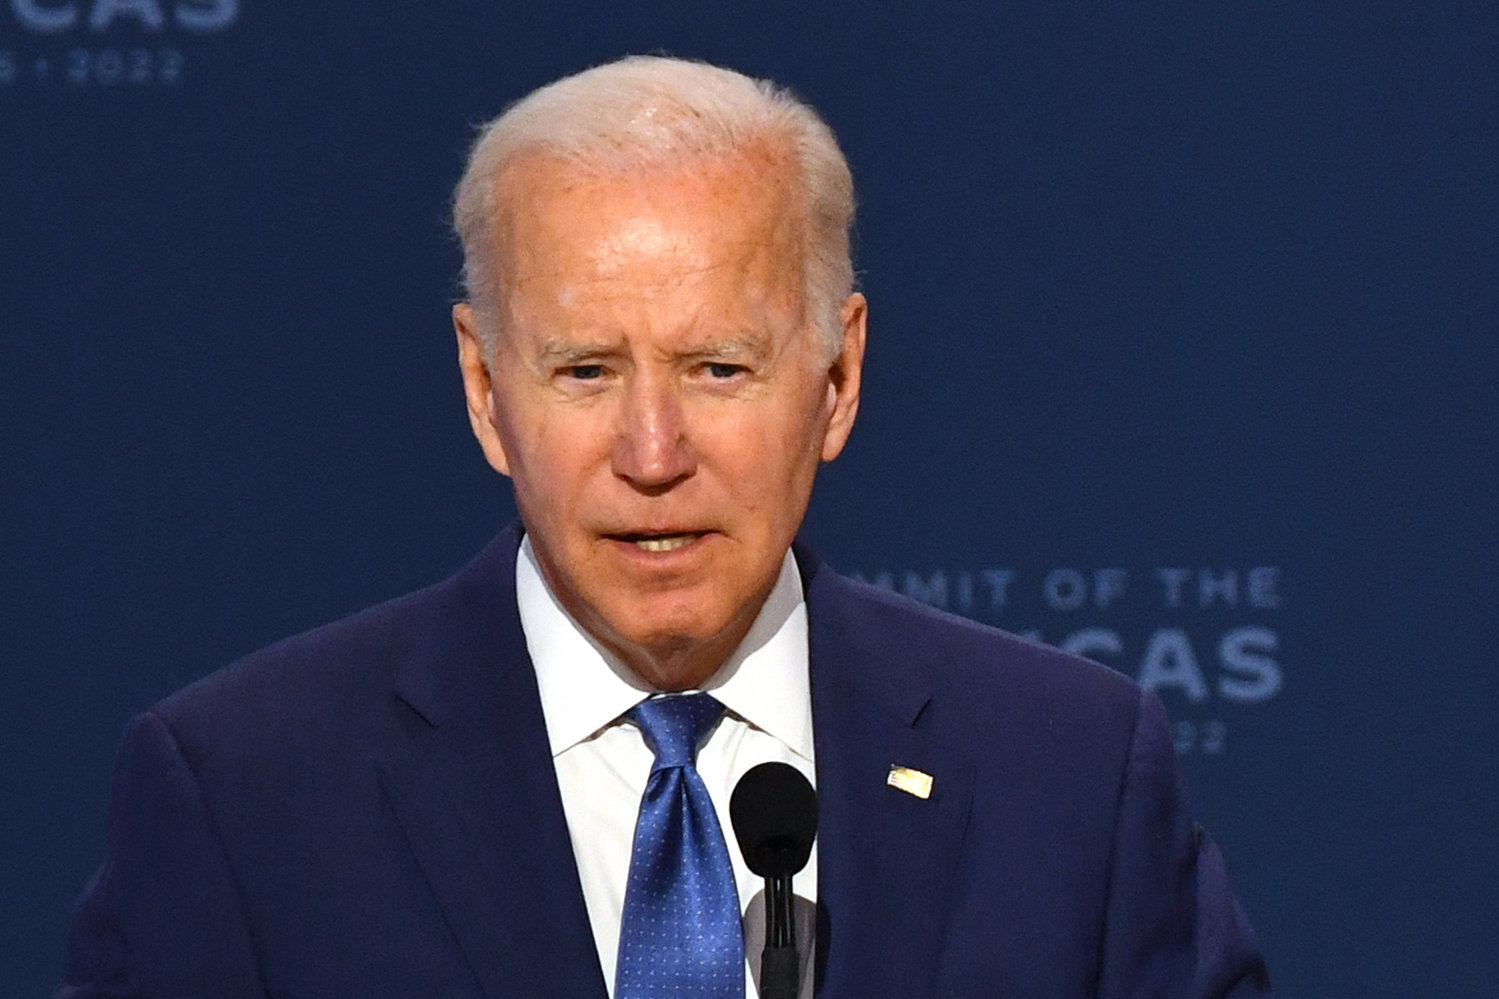 U.S. President Joe Biden addresses a plenary session of the 9th Summit of the Americas in Los Angeles, California, June 9, 2022. (Patrick T. Fallon/AFP via Getty Images/TNS)